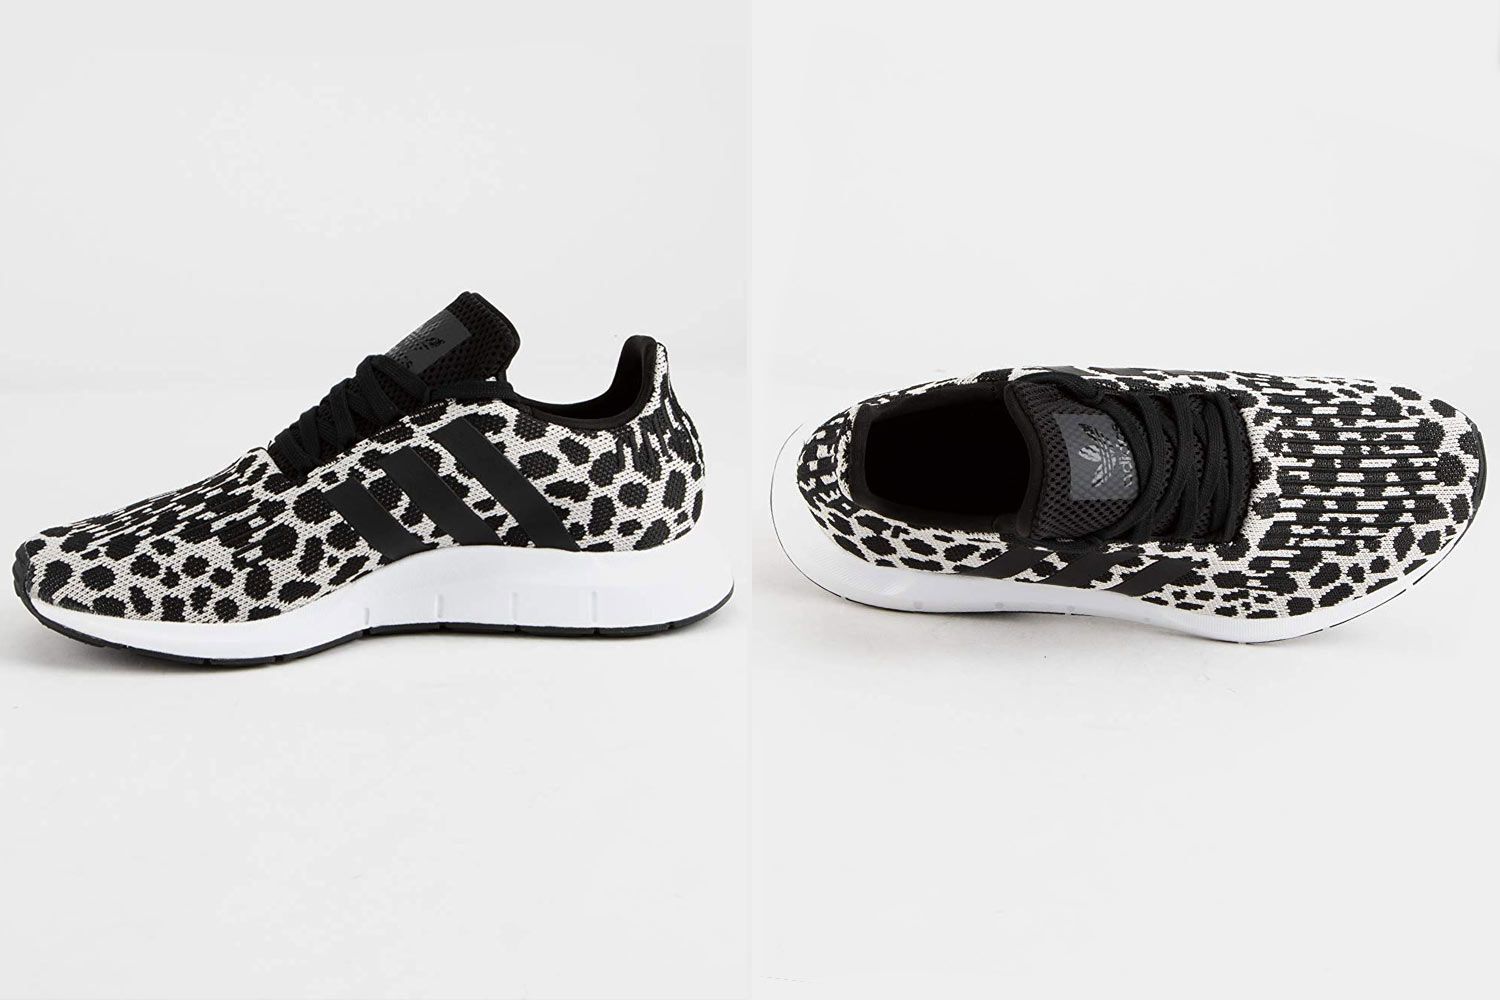 animal print athletic shoes